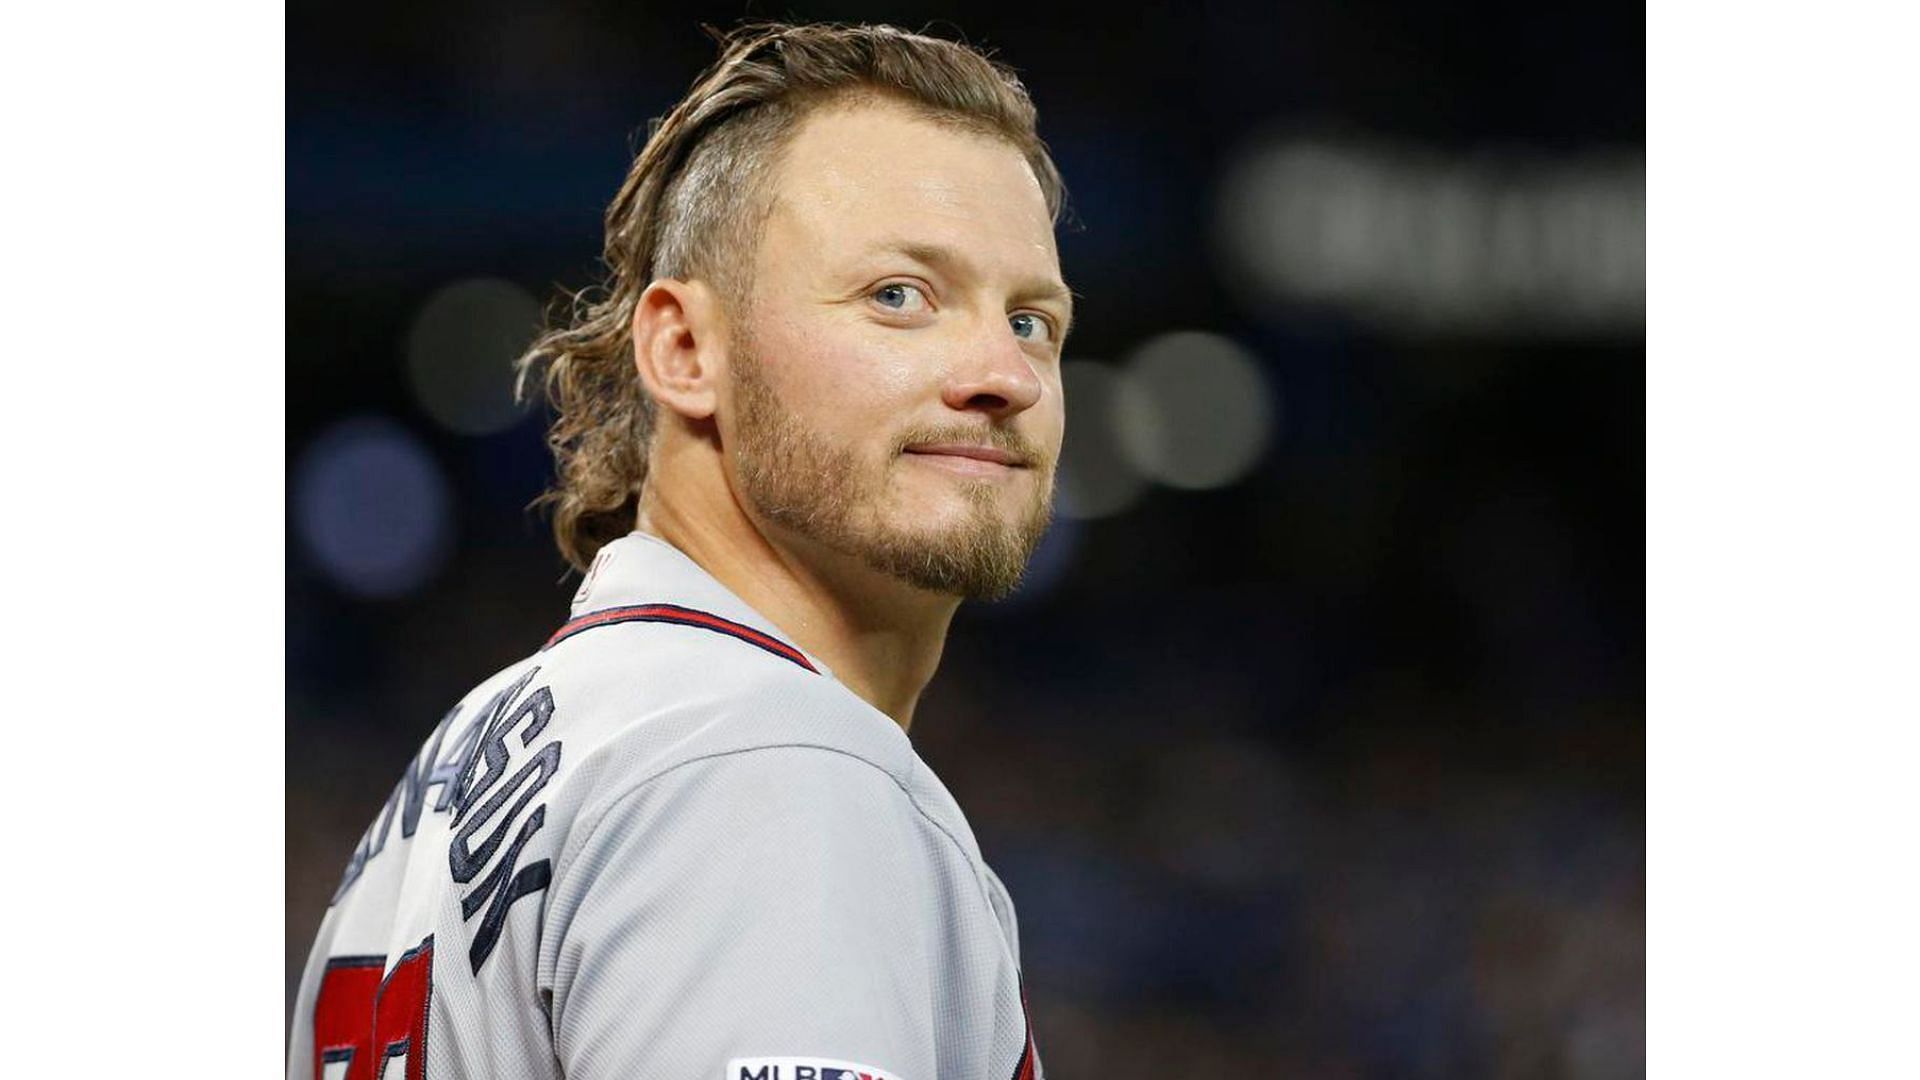 Josh Donaldson controversy and suspension, explained: Light